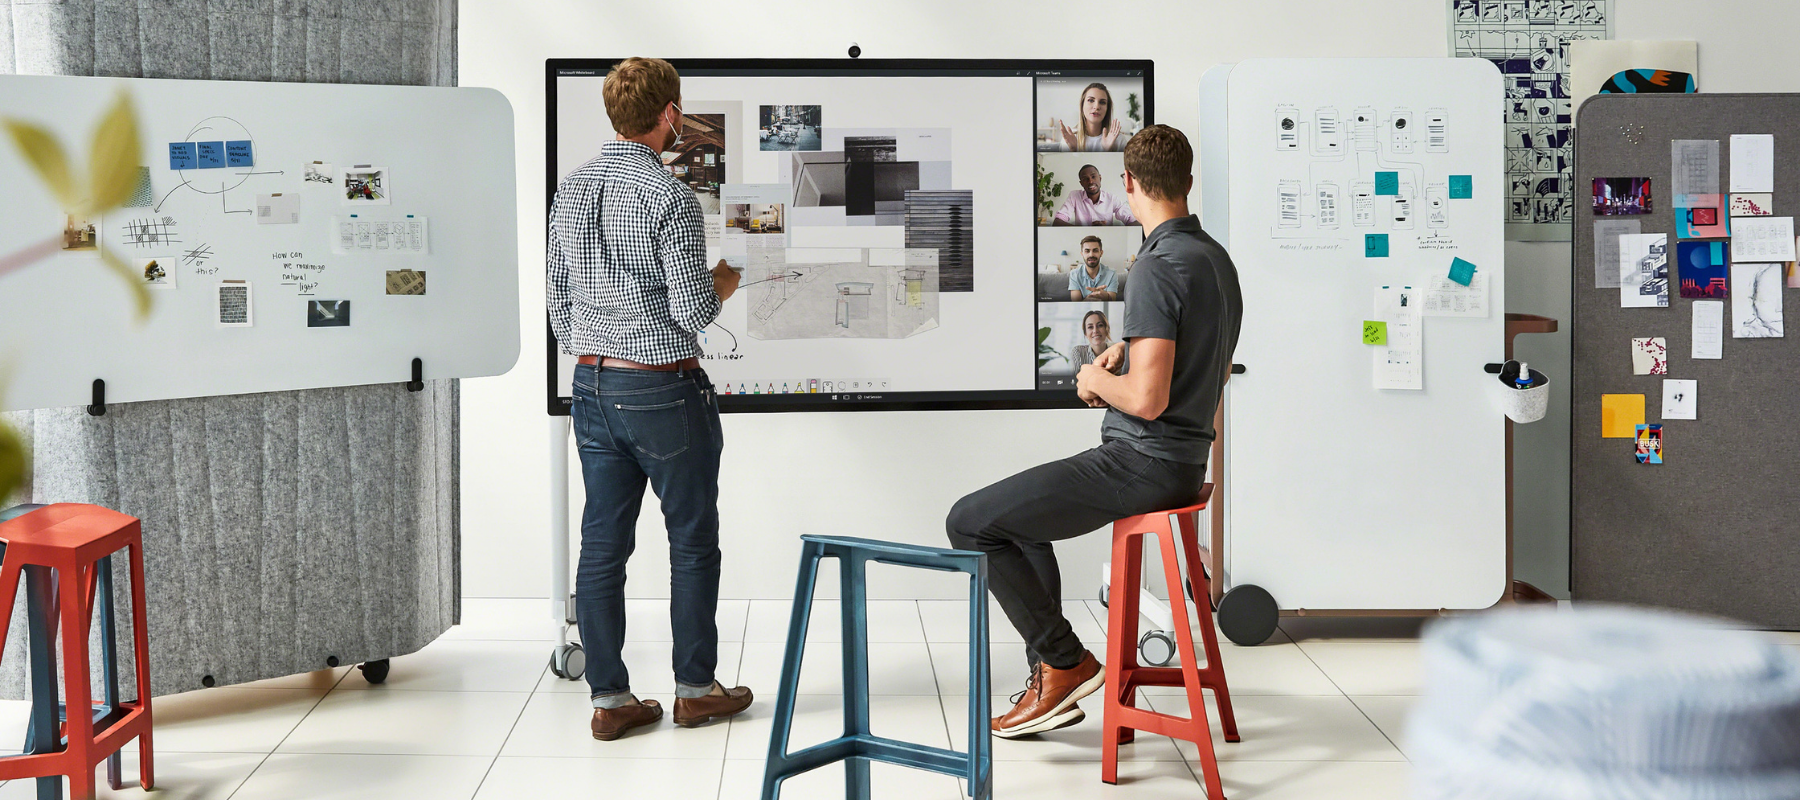 two people in office sitting on stools having a virtual meeting with other coworkers on a screen mounted on the wall